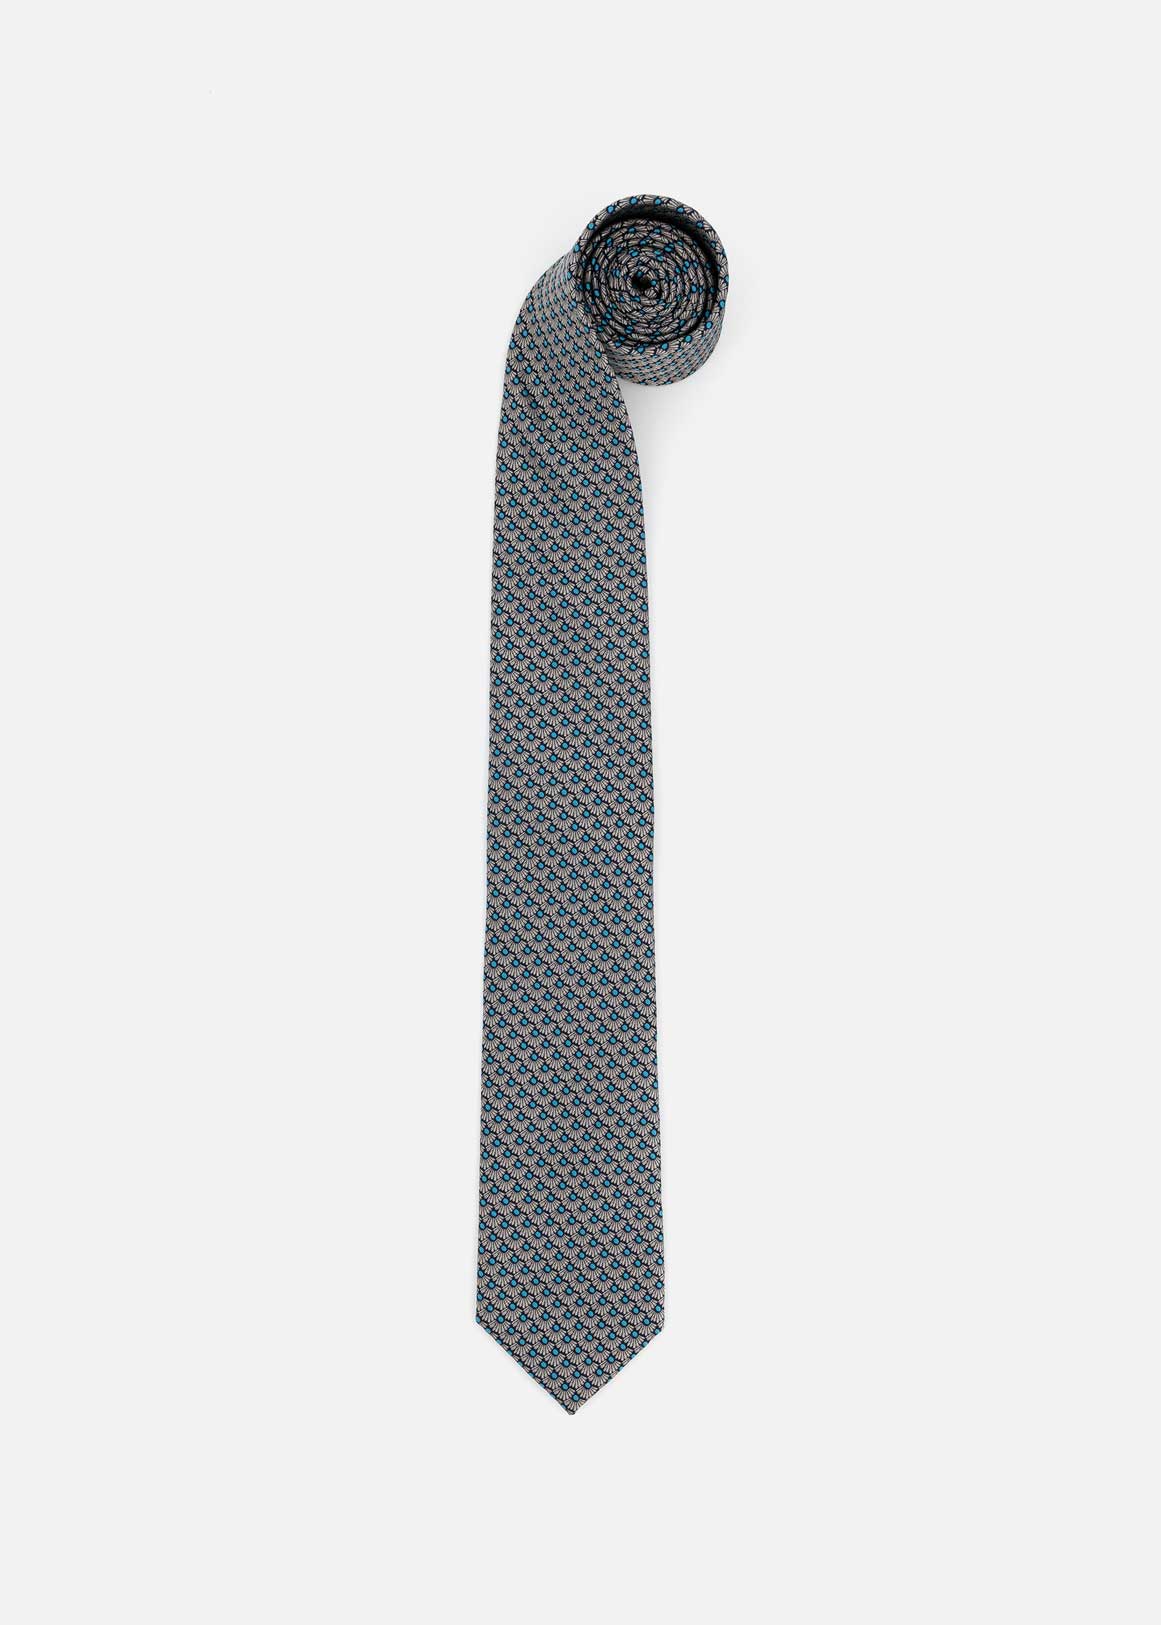 Spot Design Tie | Woolworths.co.za